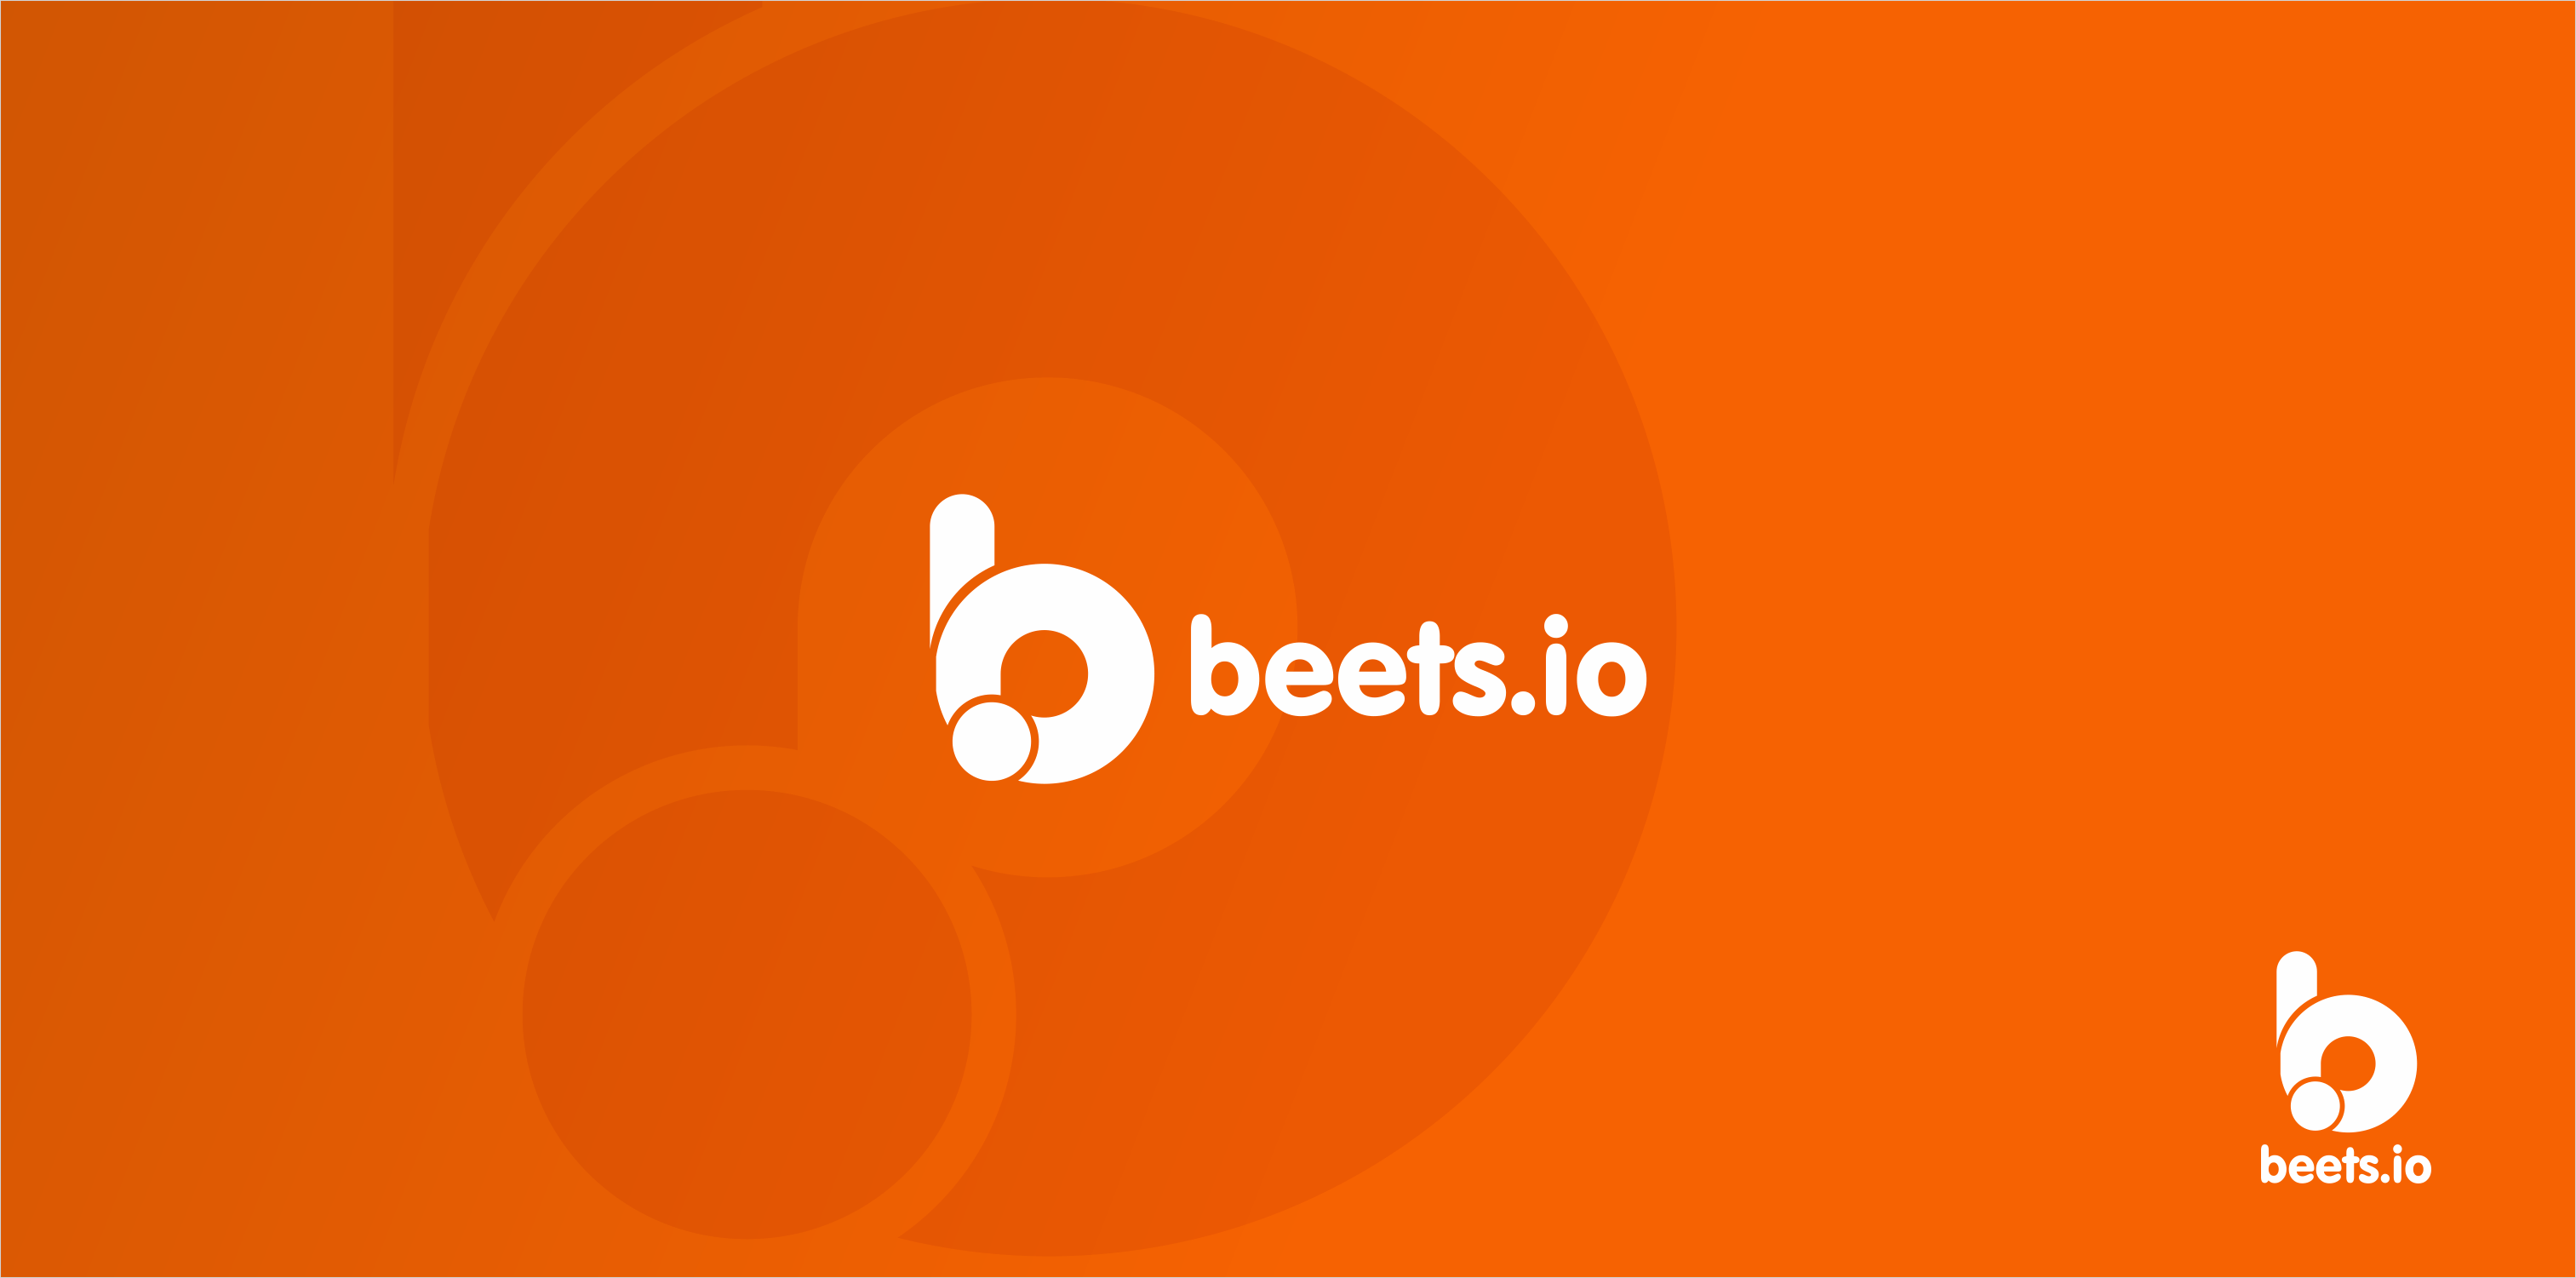 Beets Logo - Solved! LOGO proposal to beets.io · Issue #2923 · beetbox/beets · GitHub